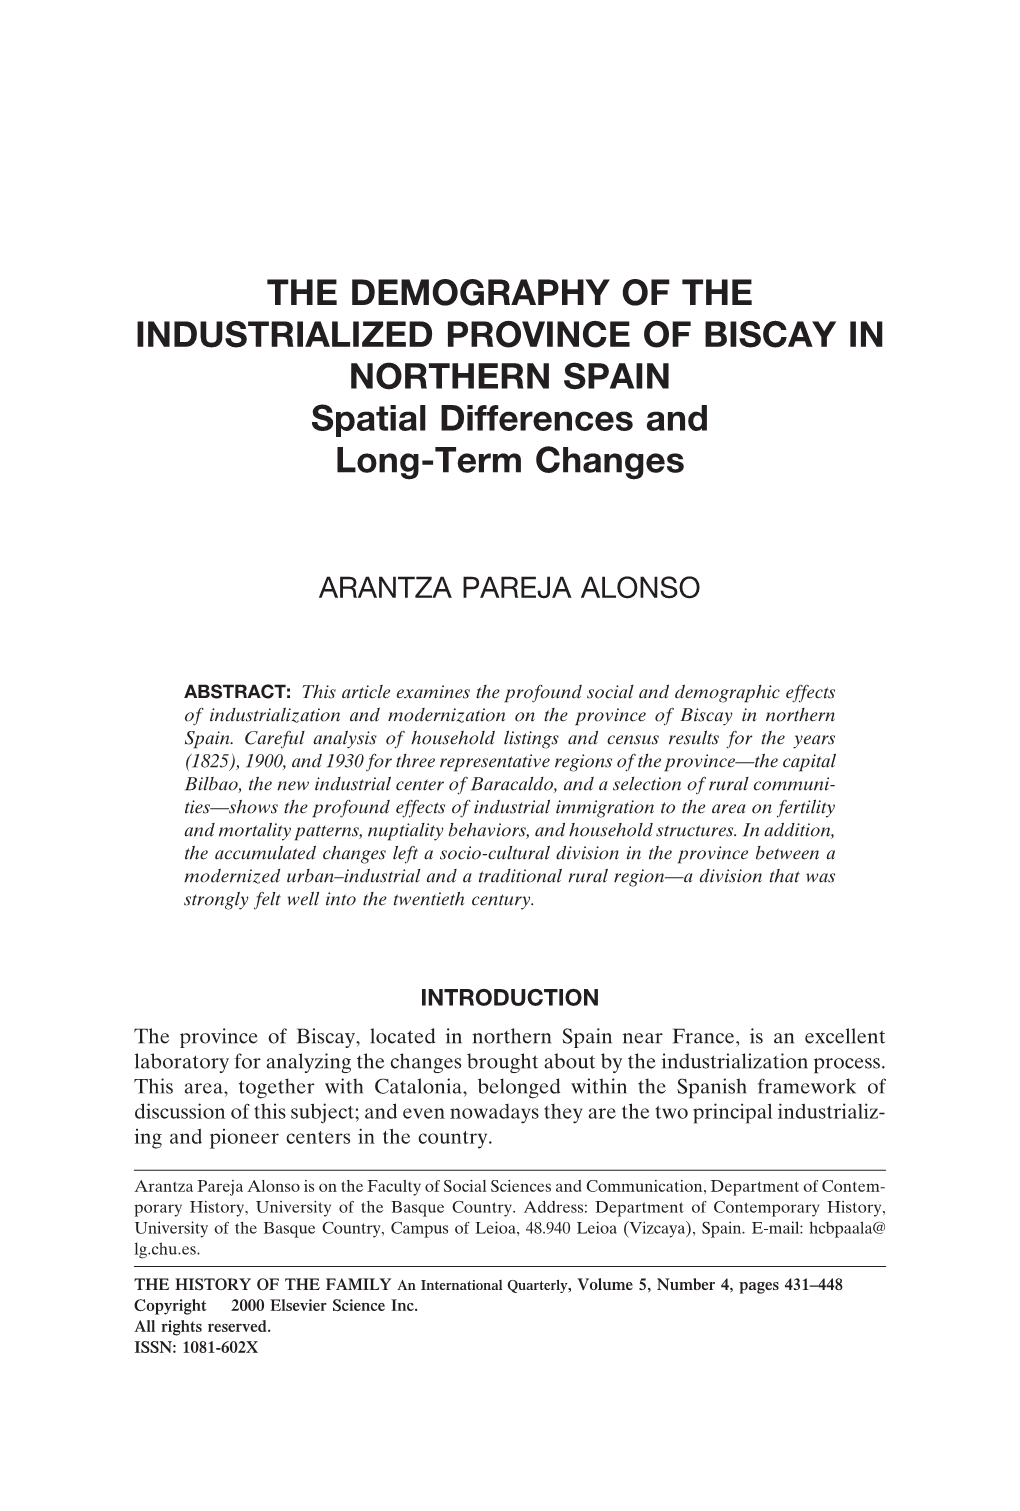 THE DEMOGRAPHY of the INDUSTRIALIZED PROVINCE of BISCAY in NORTHERN SPAIN Spatial Differences and Long-Term Changes